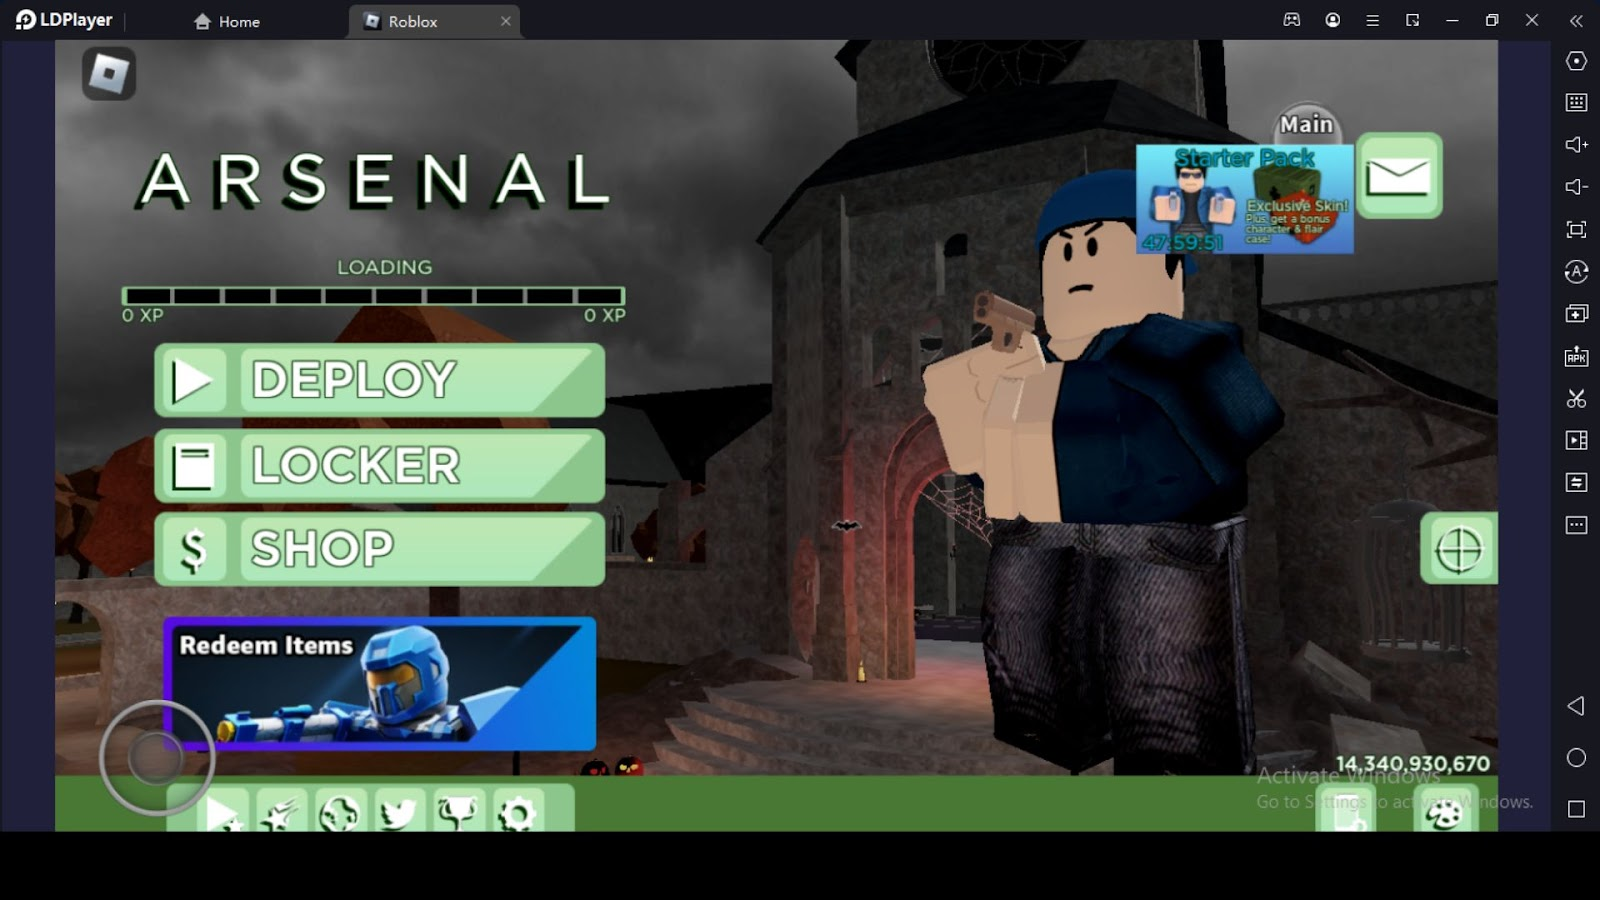 Best Roblox Games to Play with 2 - 4 Friends